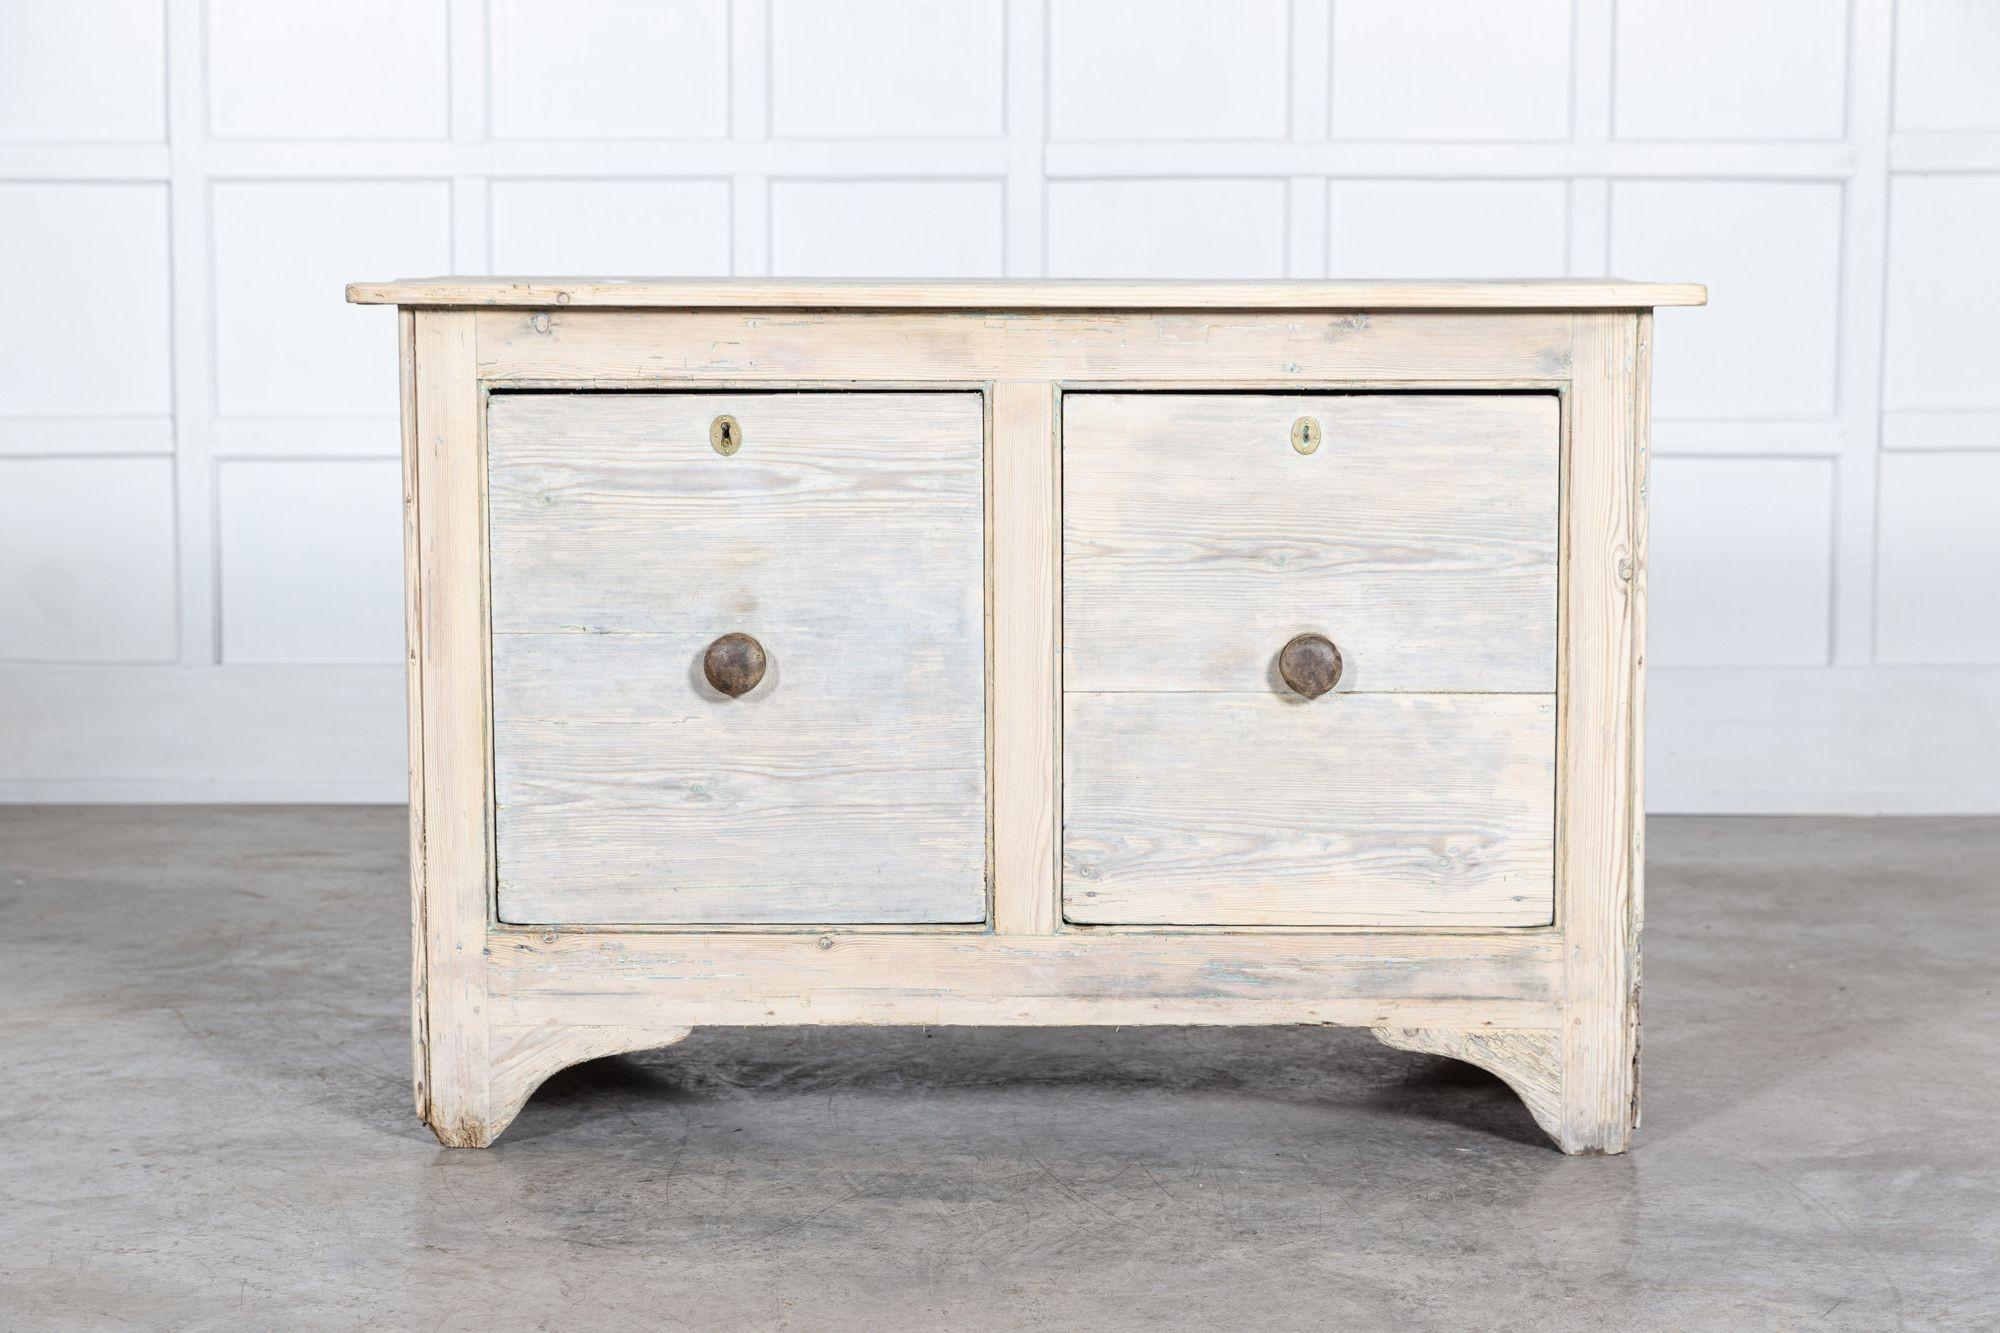 circa 1820.
Georgian pine bleached country house storage chest / counter Island.
sku 1310.
Measures: W122 x D54 x H80 cm.